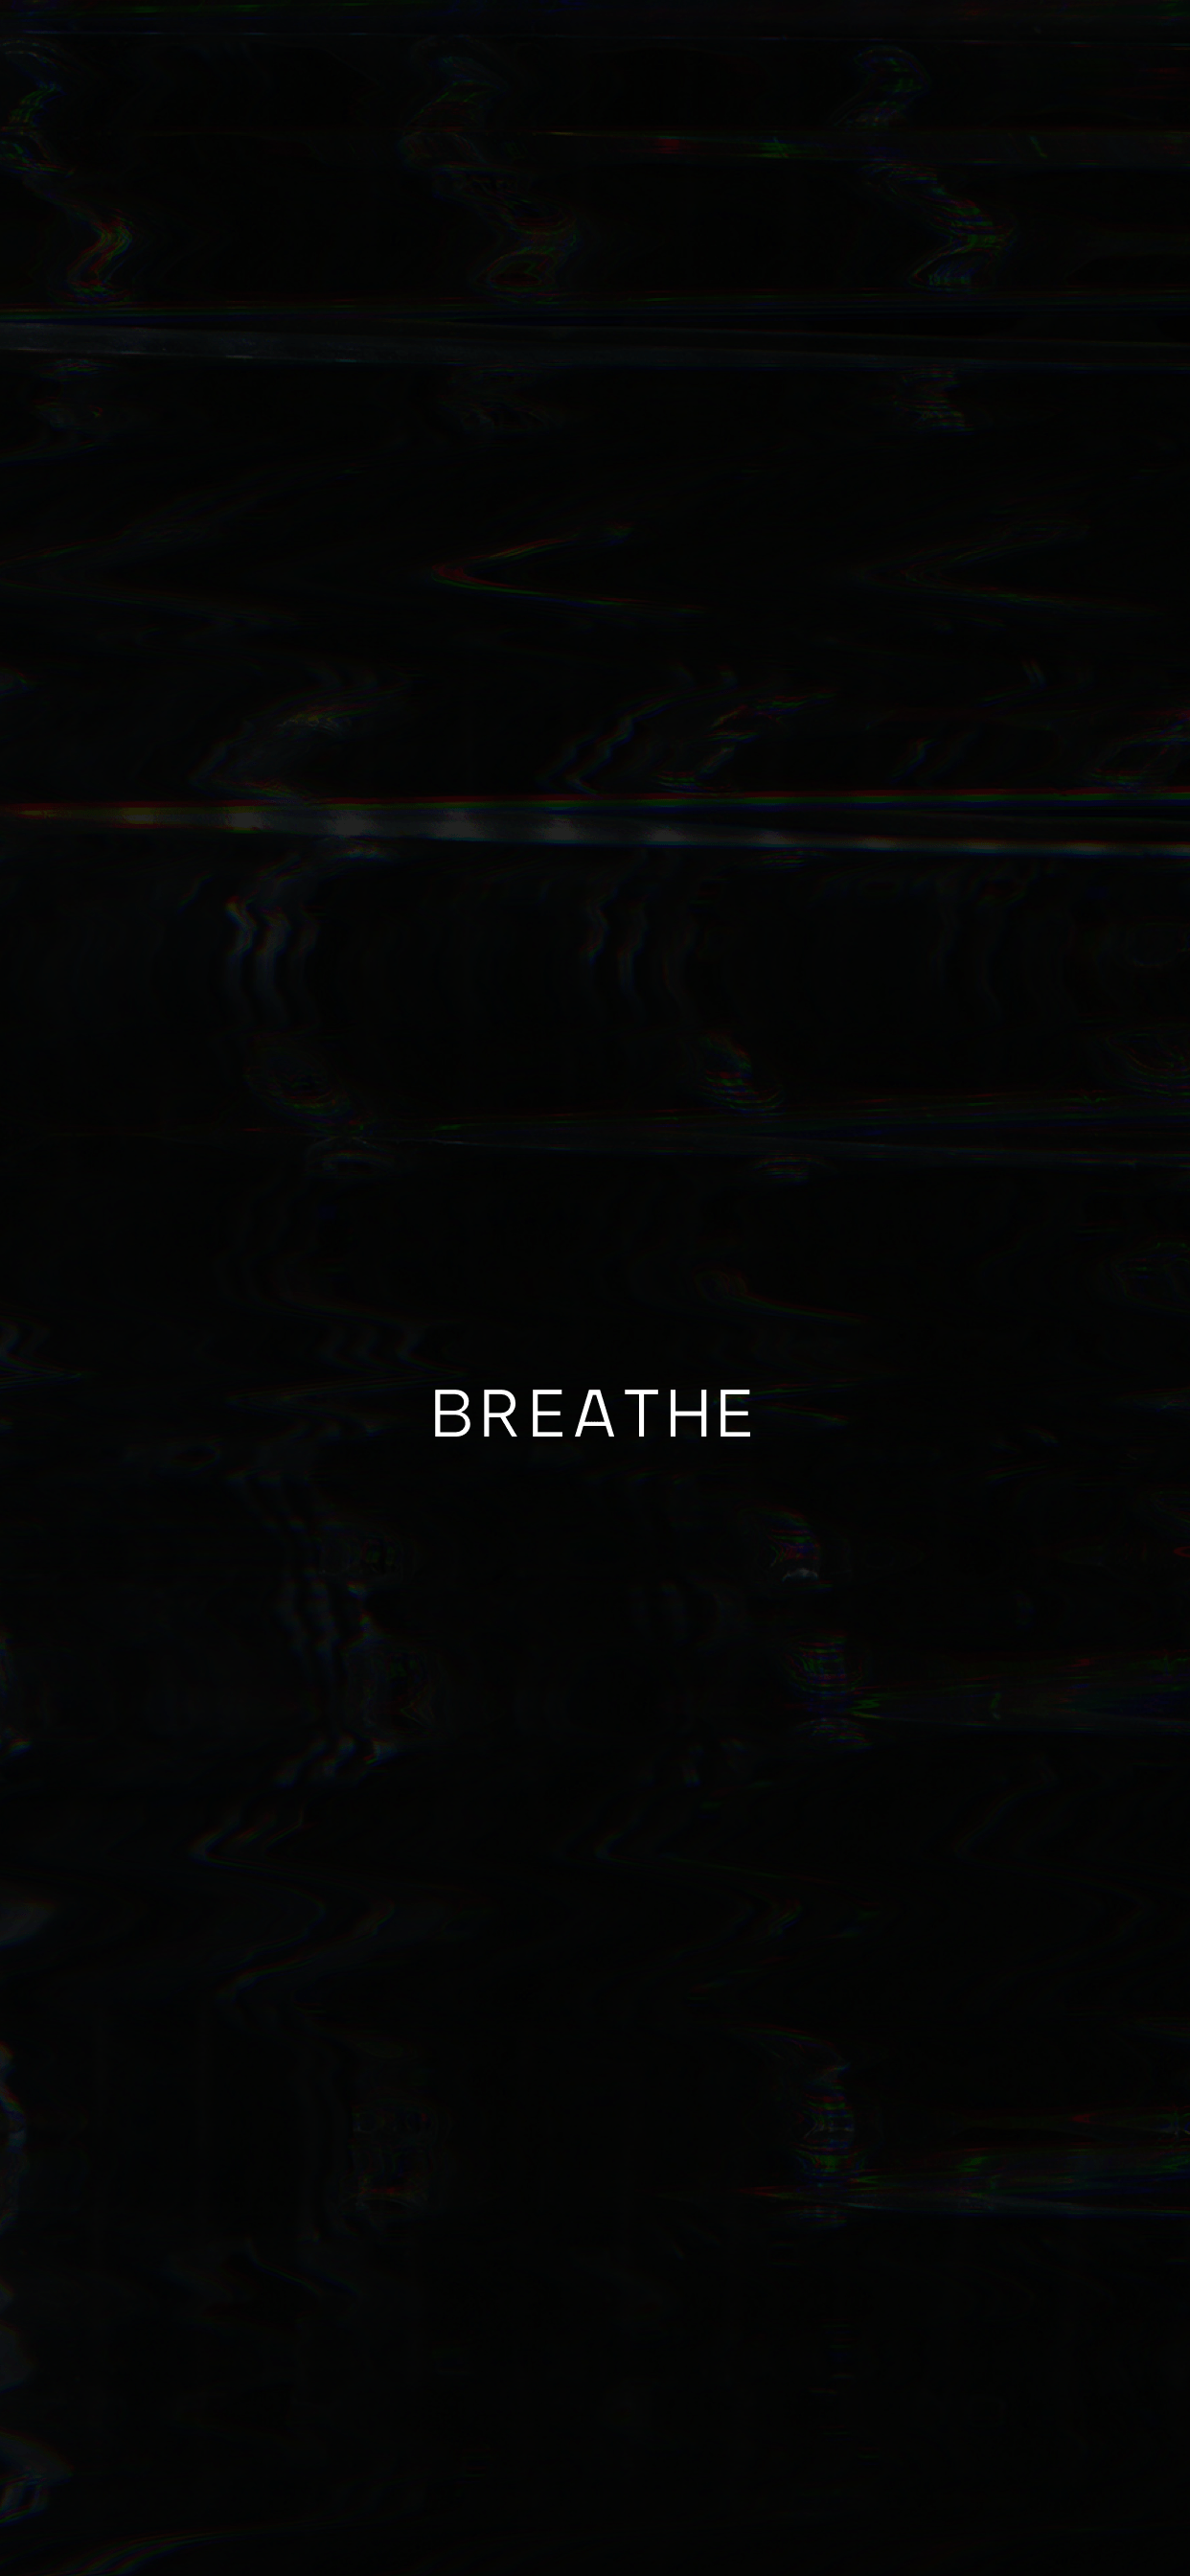 A black background with the word breathe in white - Breathe, black quotes, dark phone